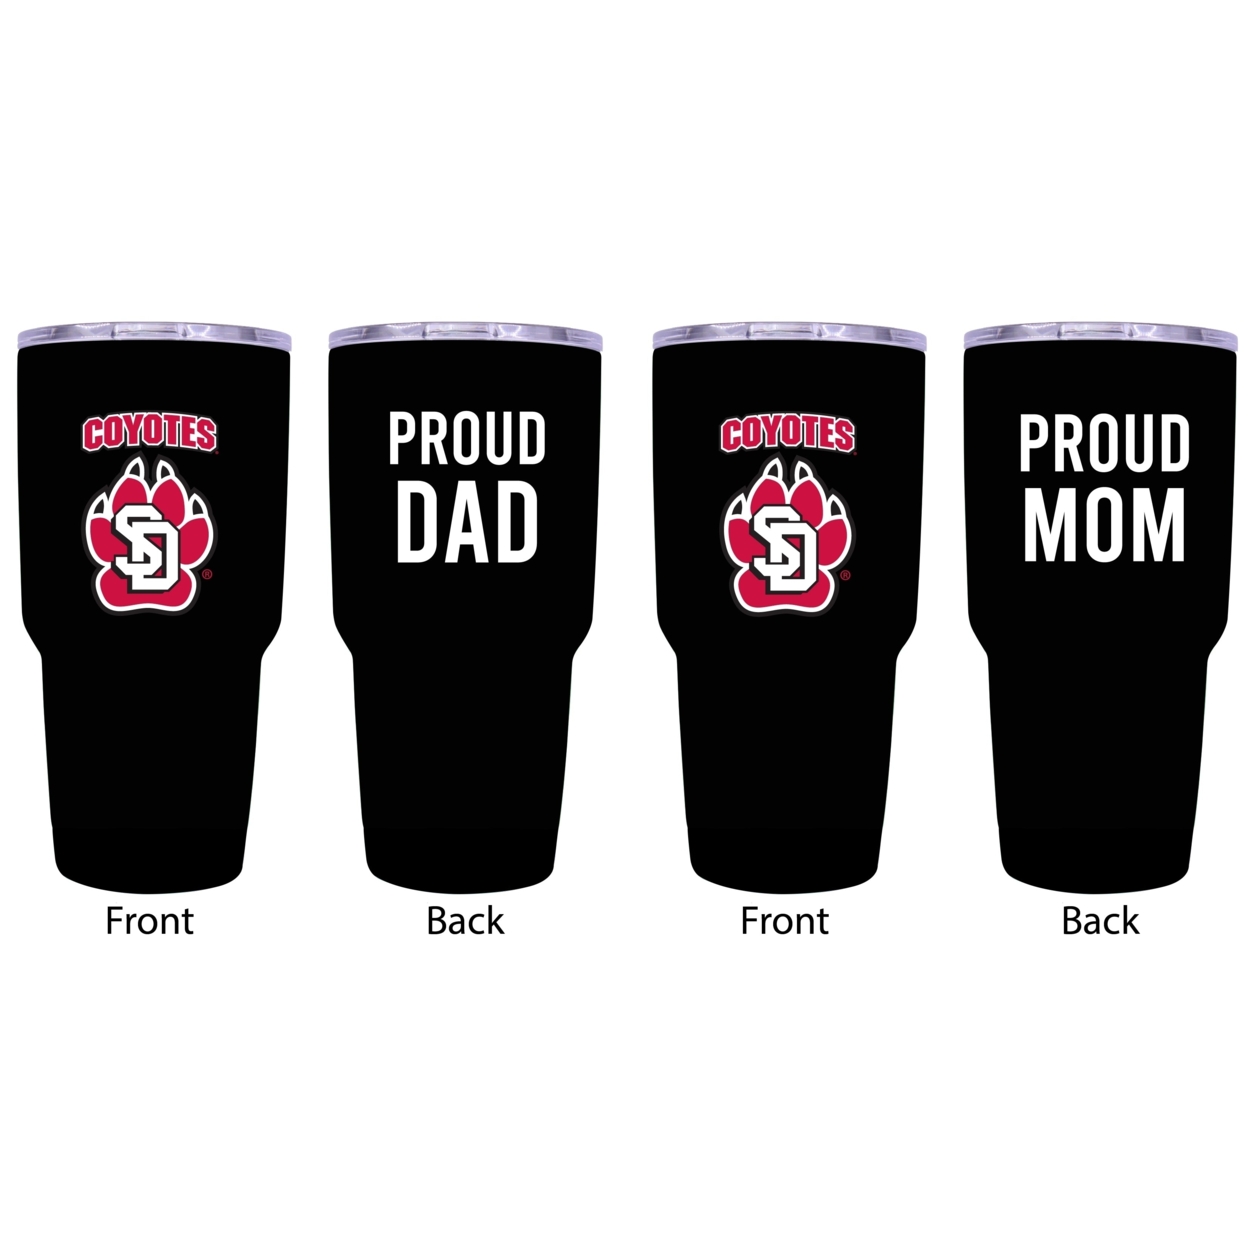 South Dakota Coyotes Proud Mom And Dad 24 Oz Insulated Stainless Steel Tumblers 2 Pack Black.